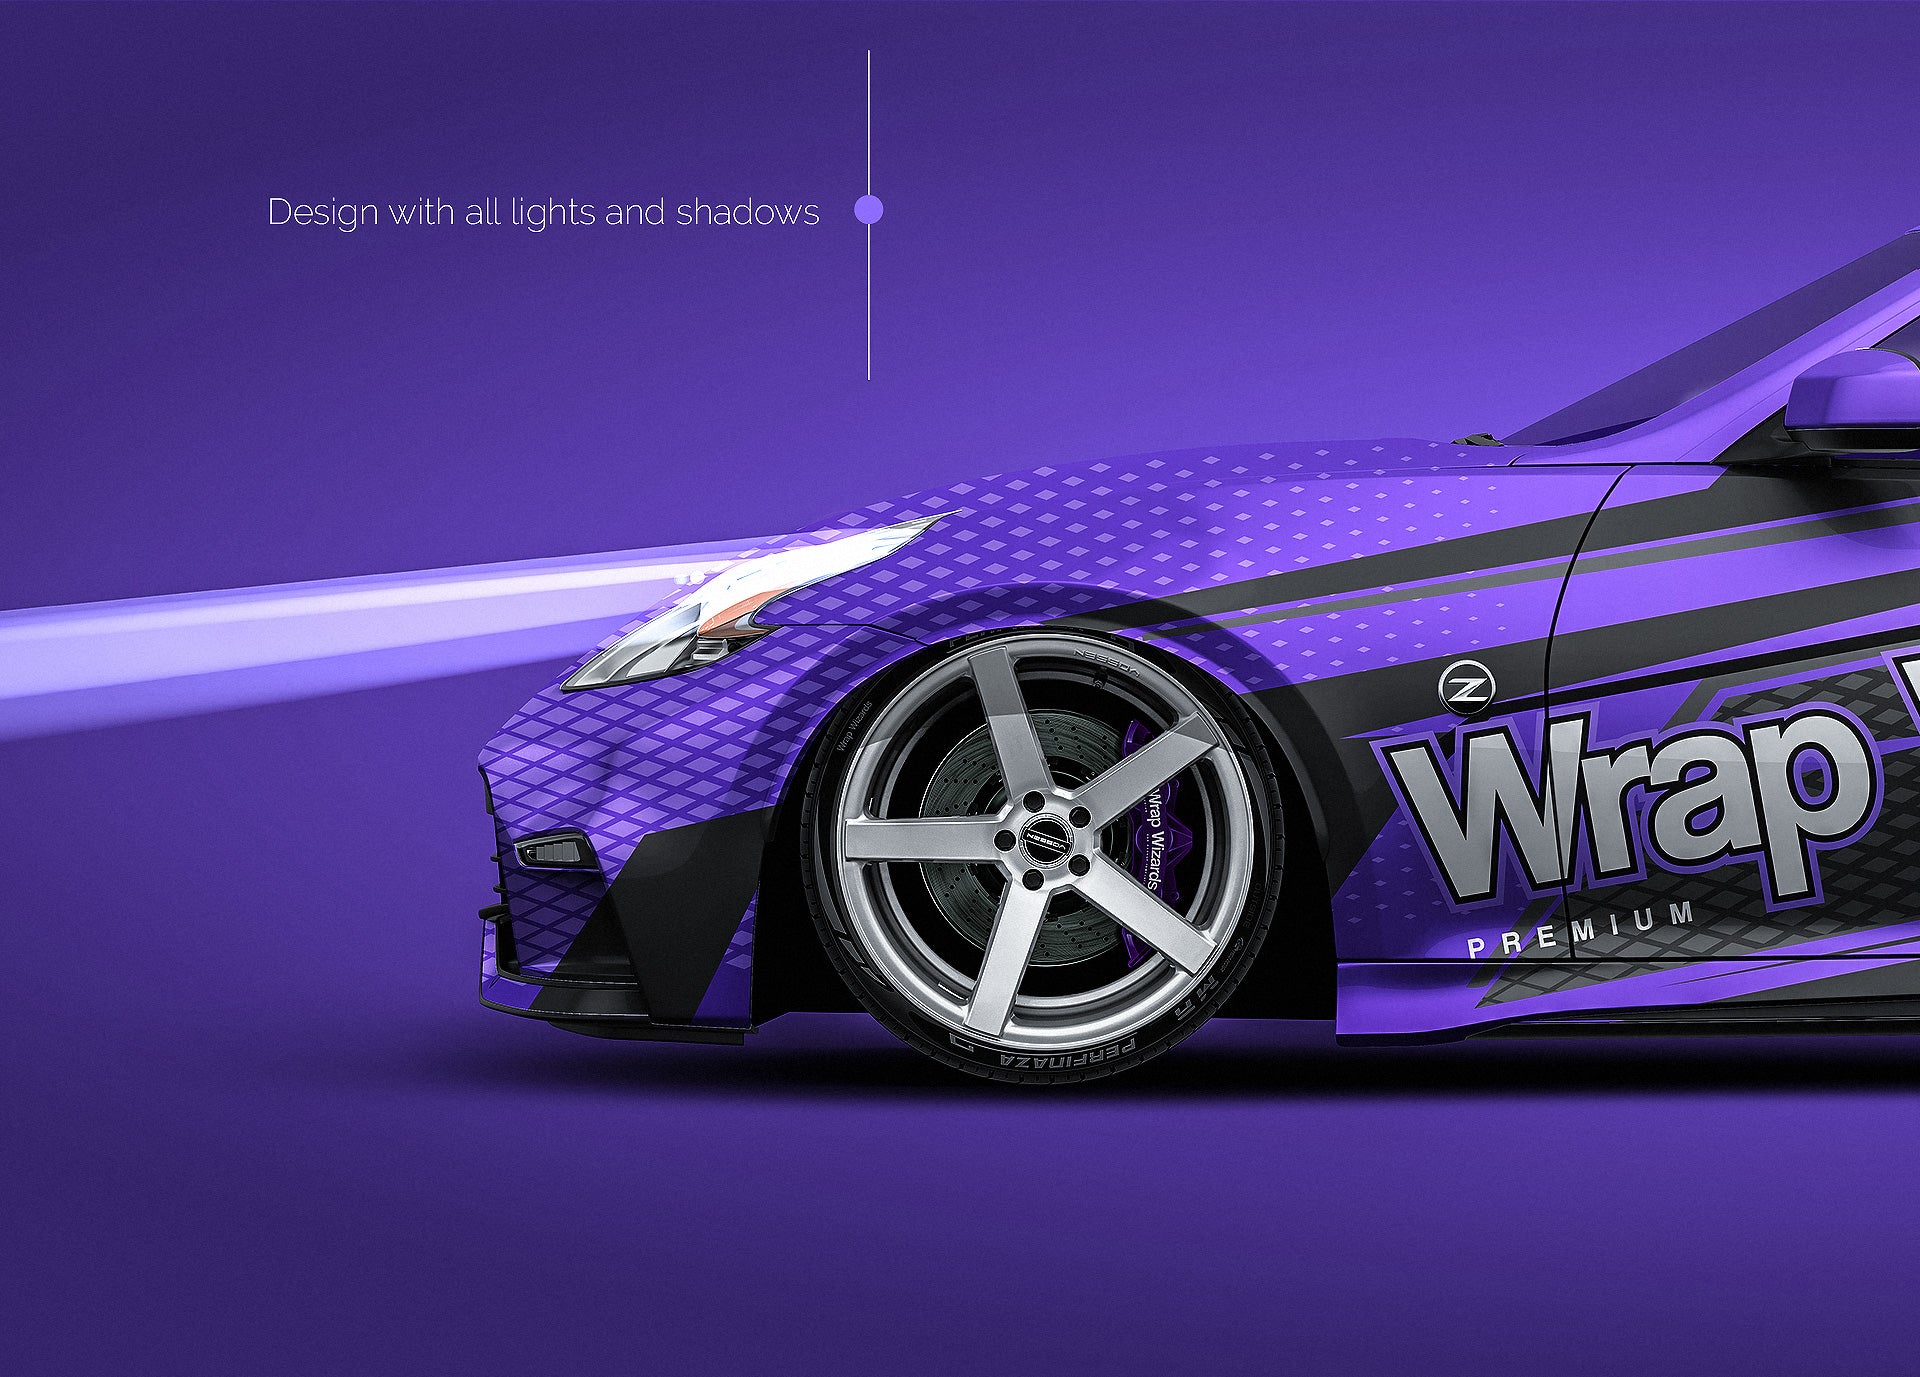 Nissan 370z Nismo 2015 glossy finish - all sides Car Mockup Template.psd